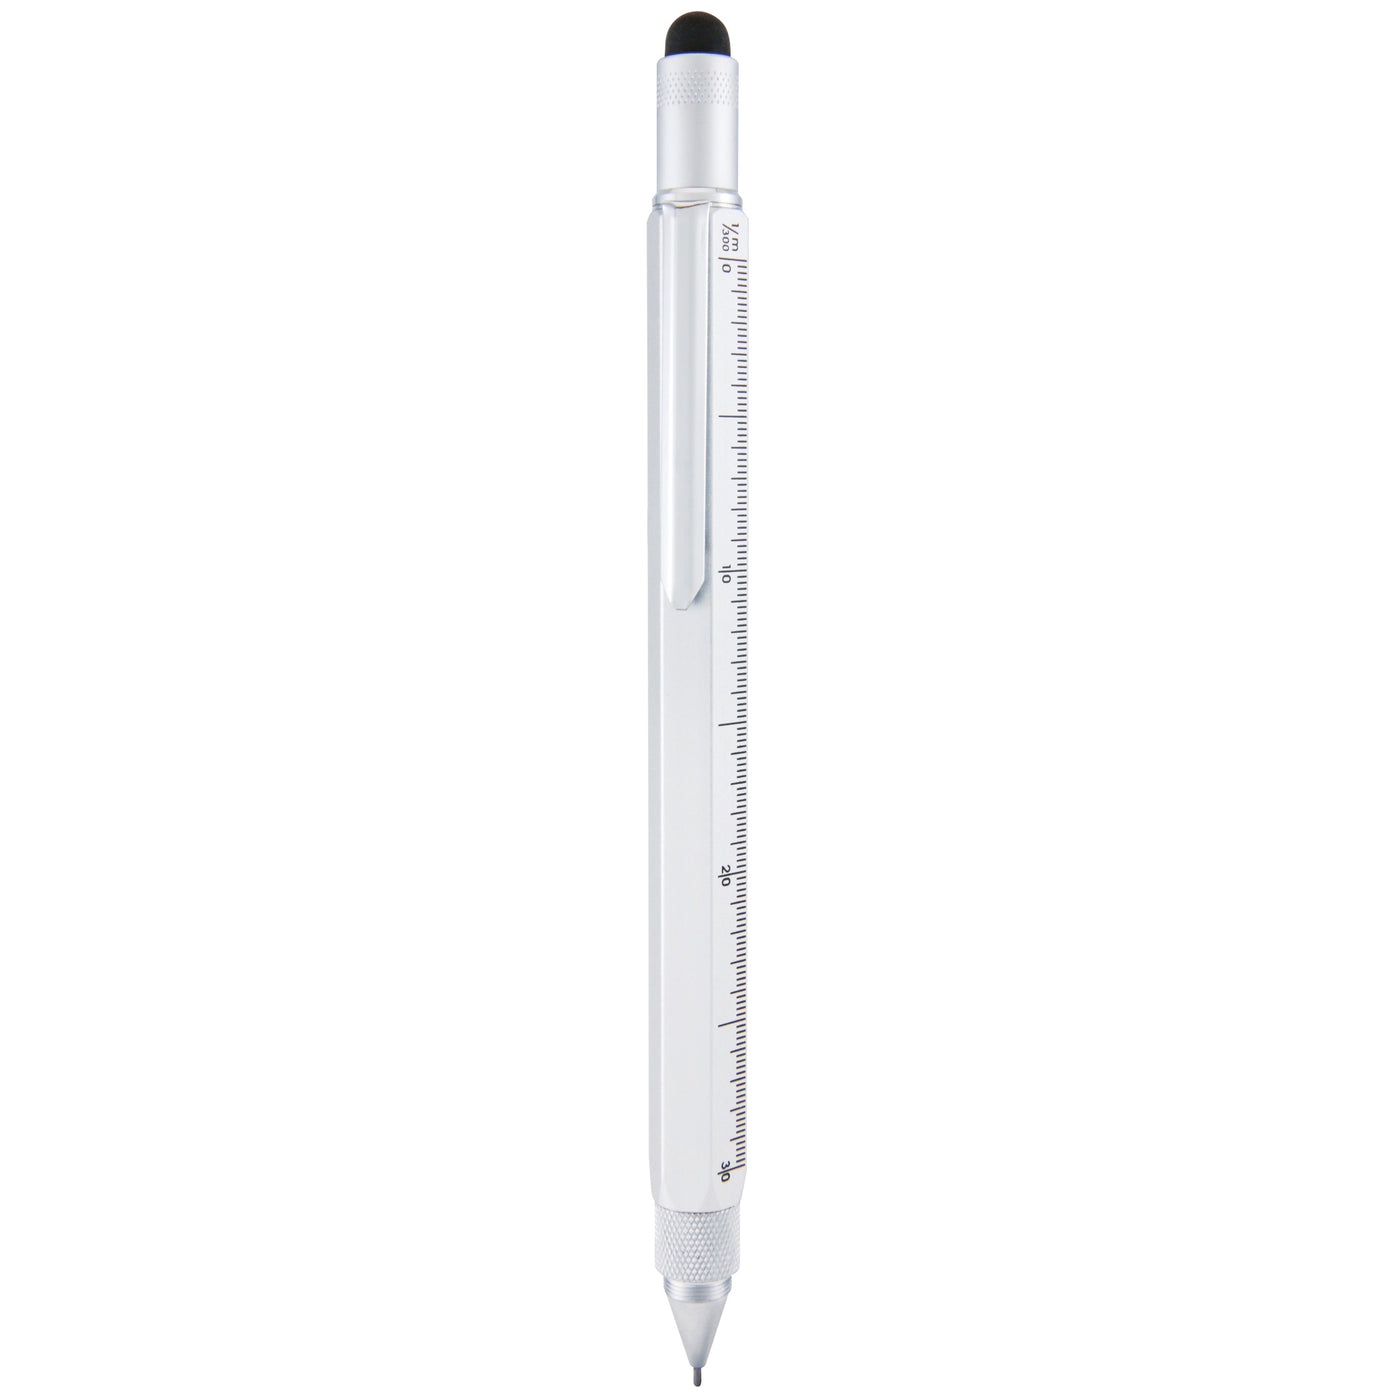 Monteverde One Touch Stylus Tool Silver Pencil